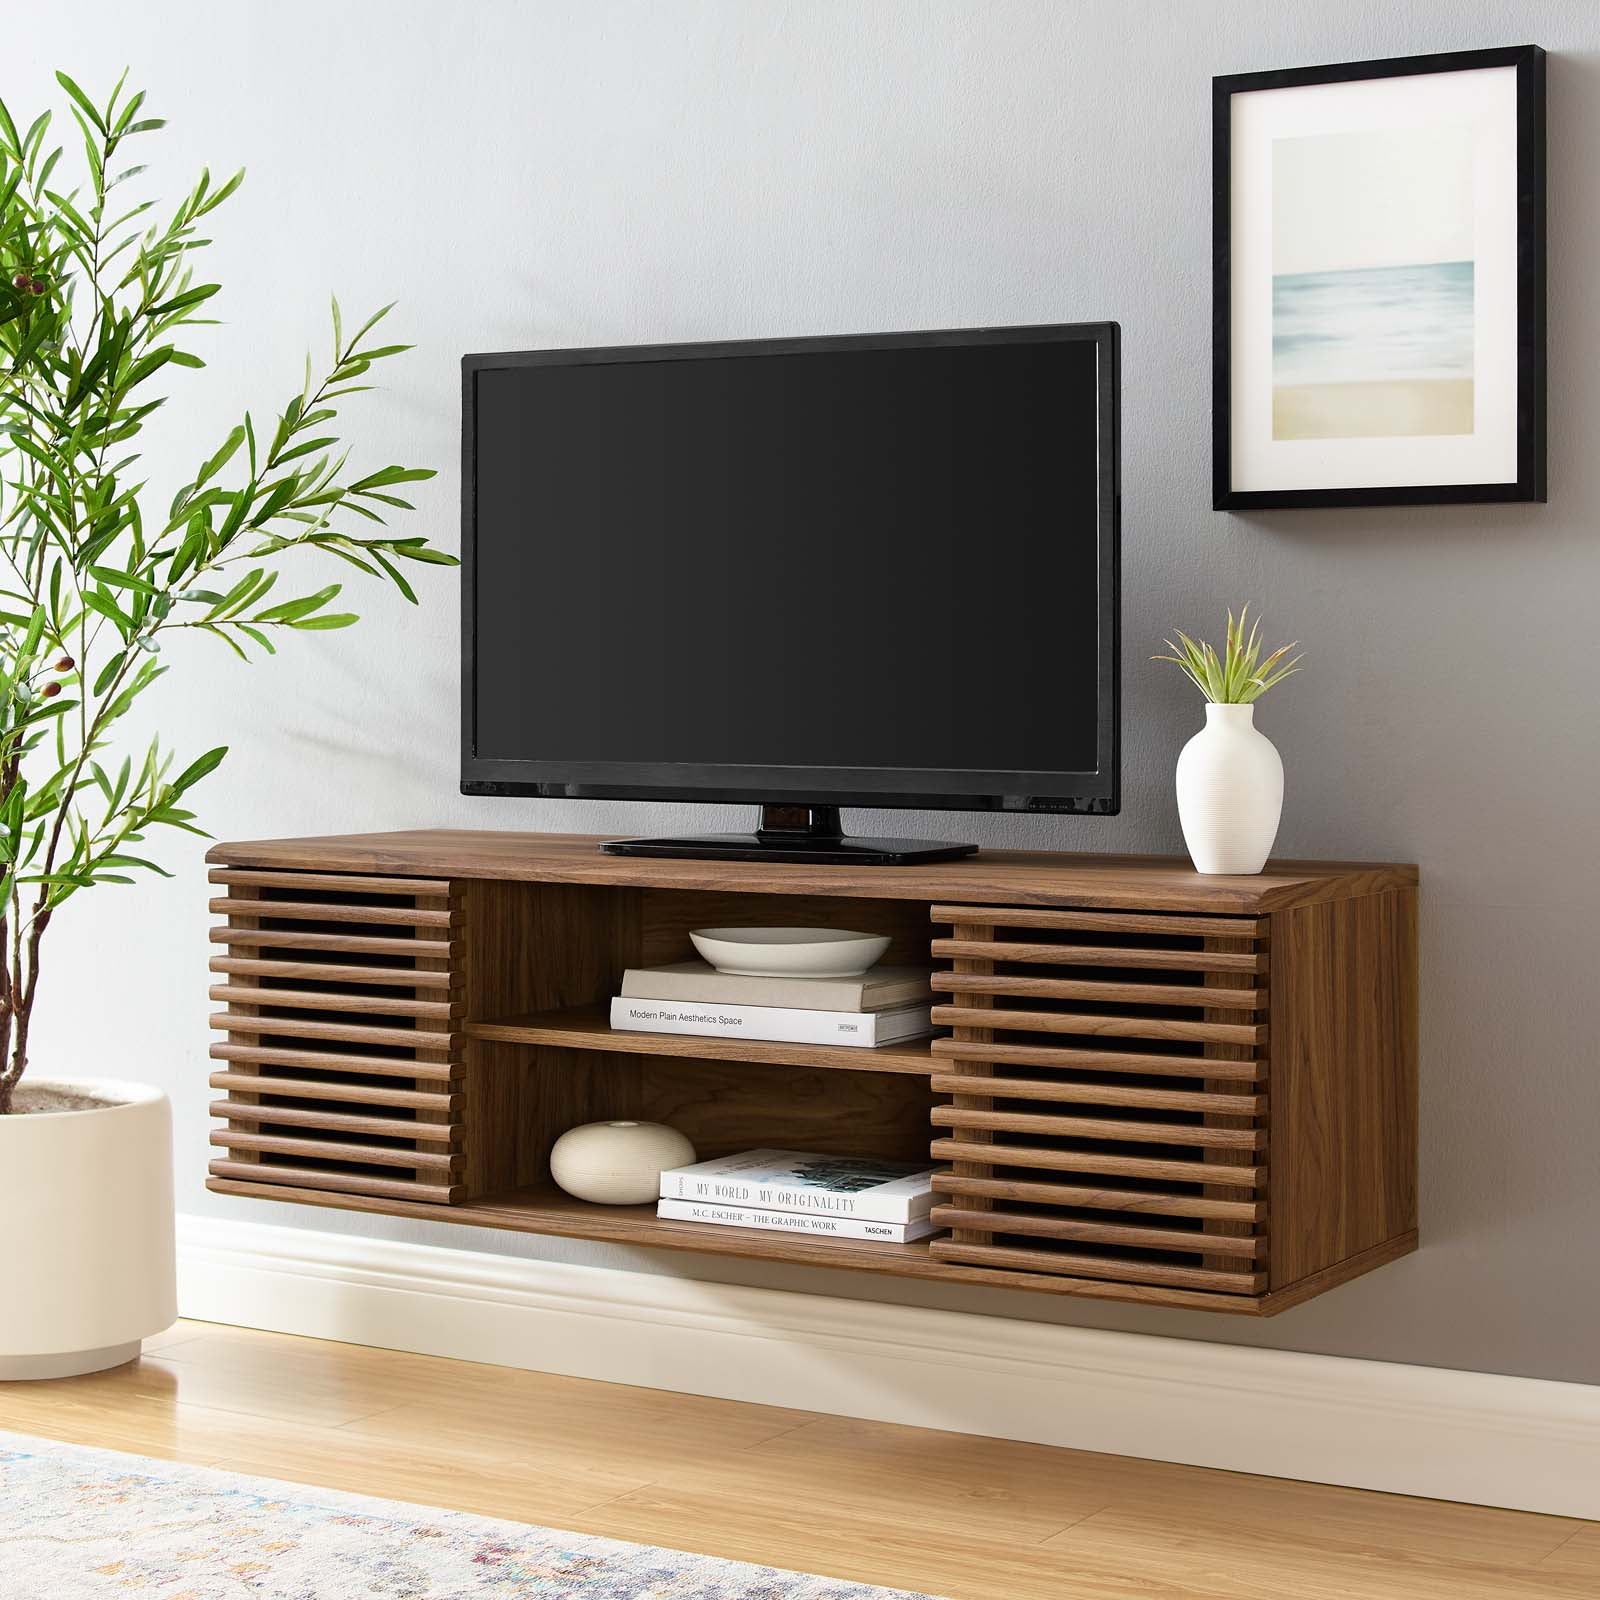 Render 46" Wall-Mount Media Console TV Stand - East Shore Modern Home Furnishings